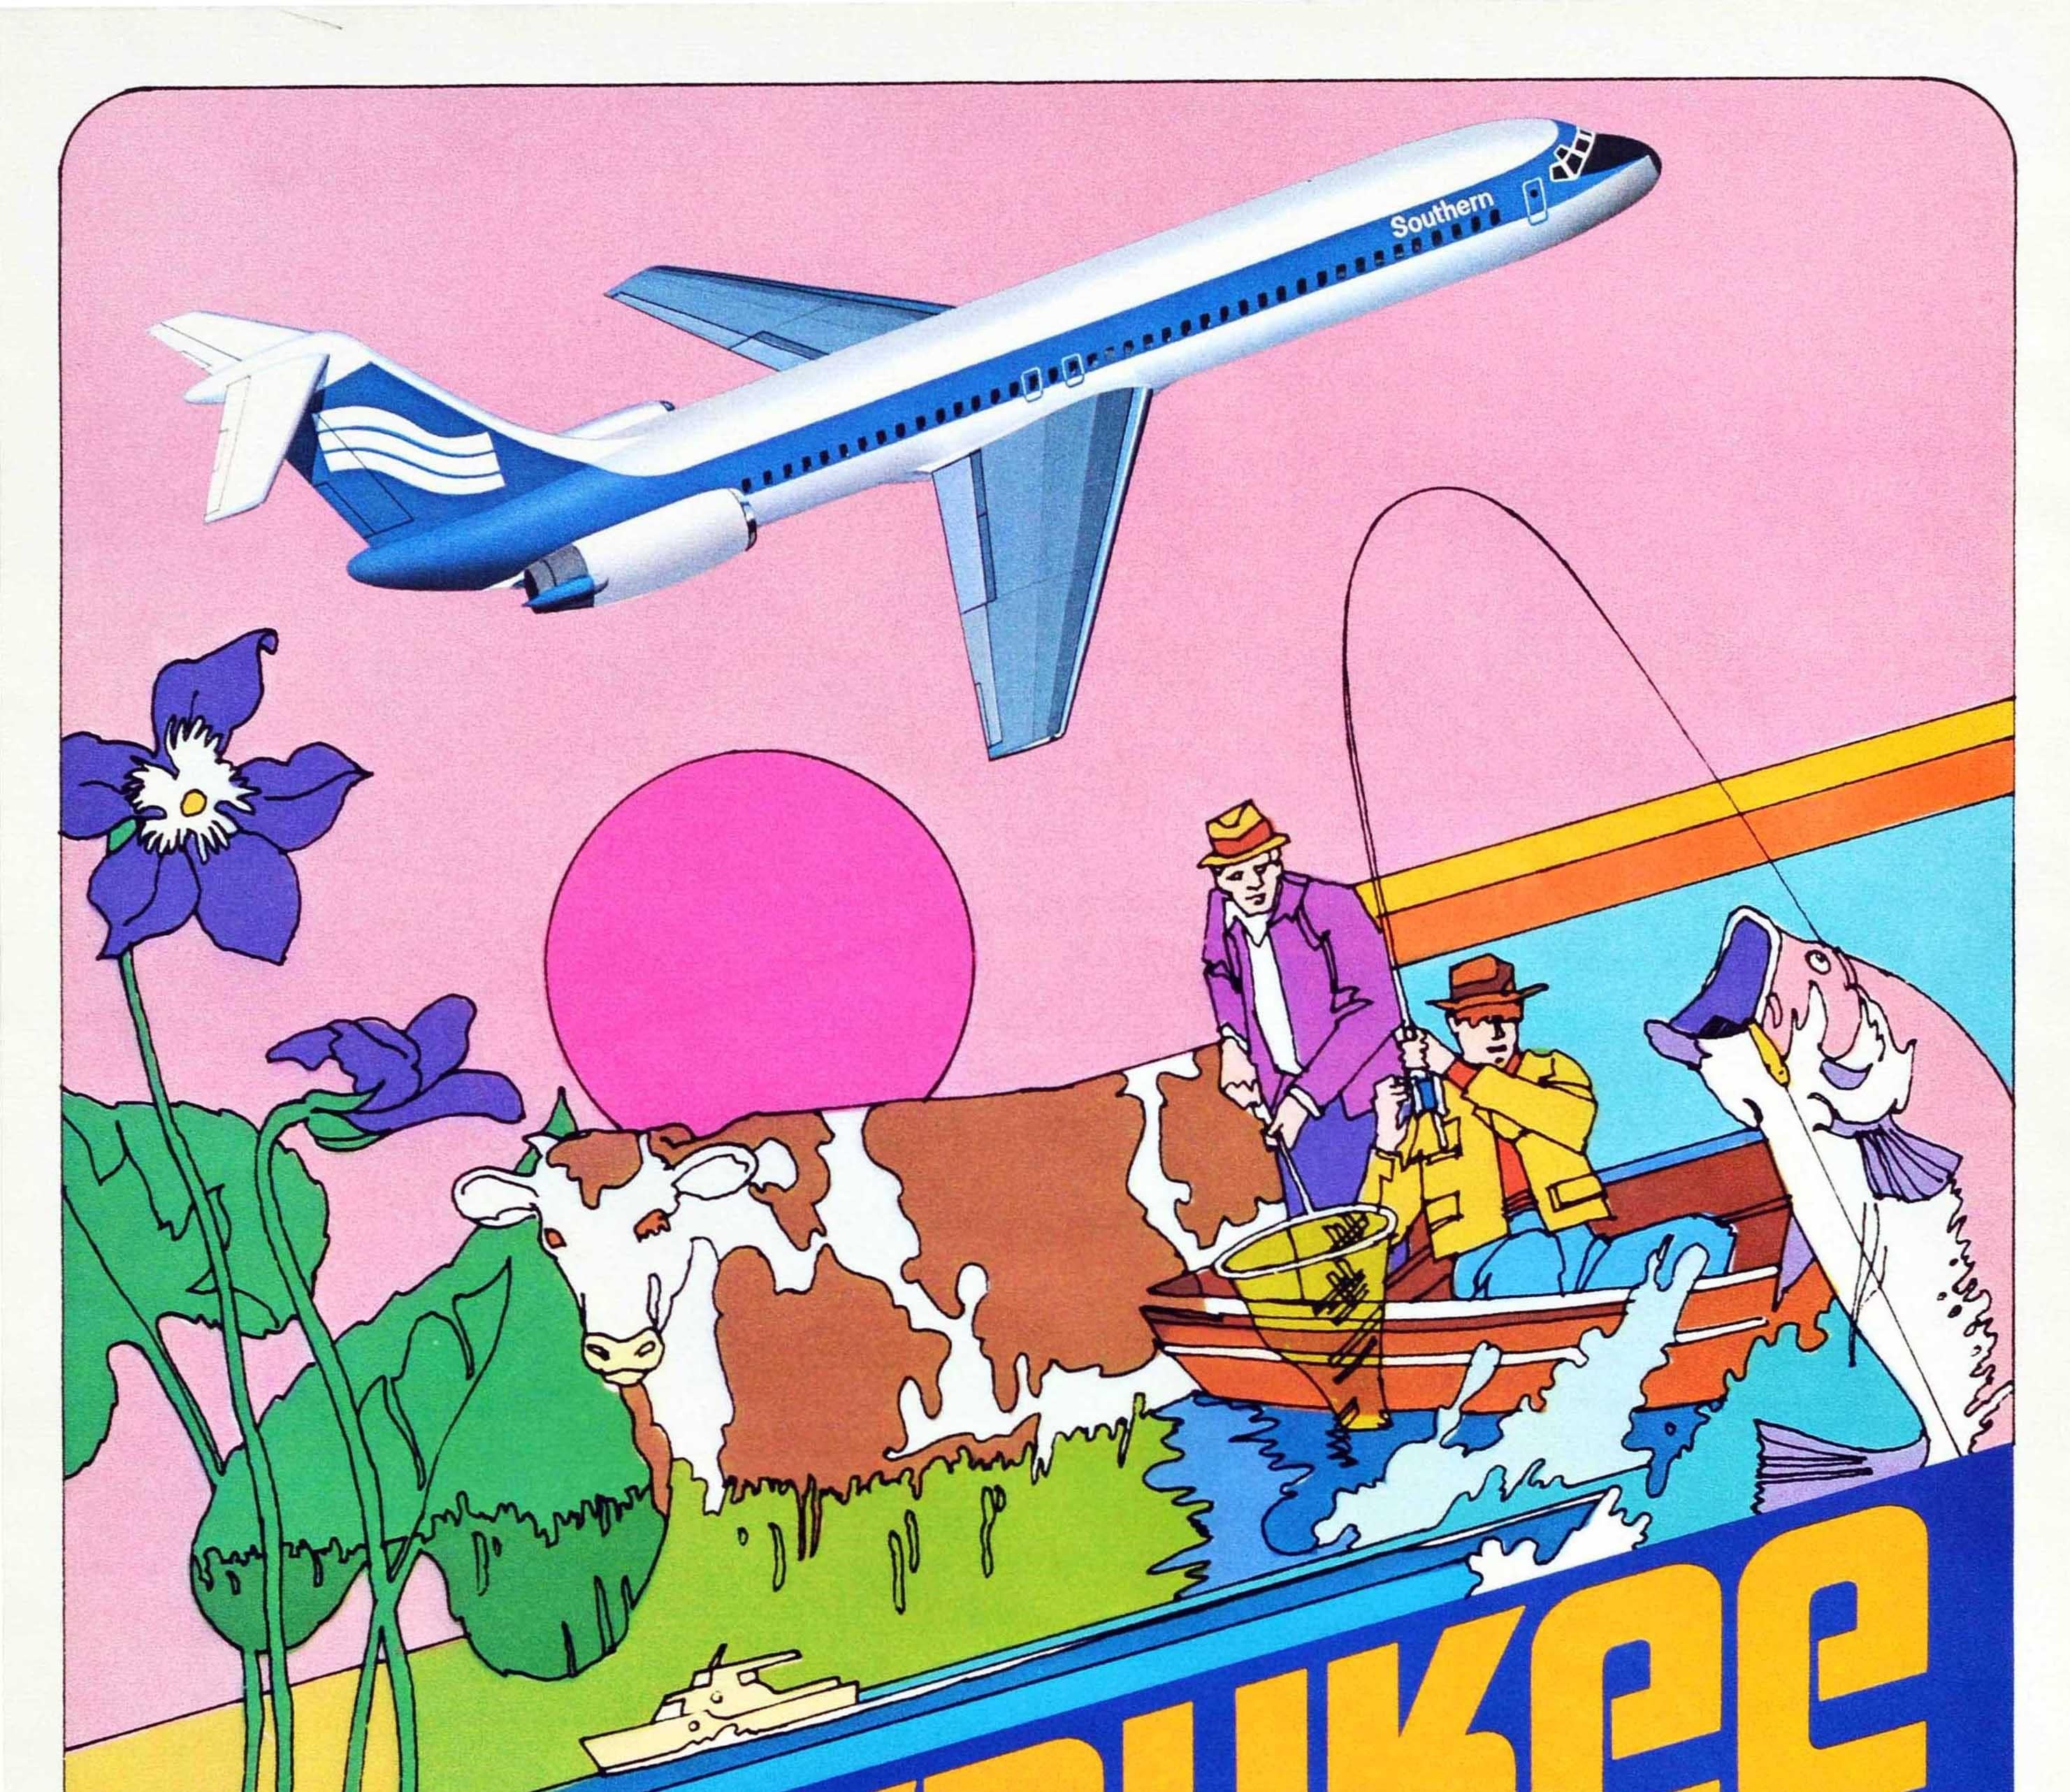 Original vintage travel poster for Milwaukee Southern Airlines (1944-1979) featuring a colourful diagonal design depicting illustrations of a cow in grass, men fishing on a boat, flowers, a sun and a Southern plane flying above, the title text in